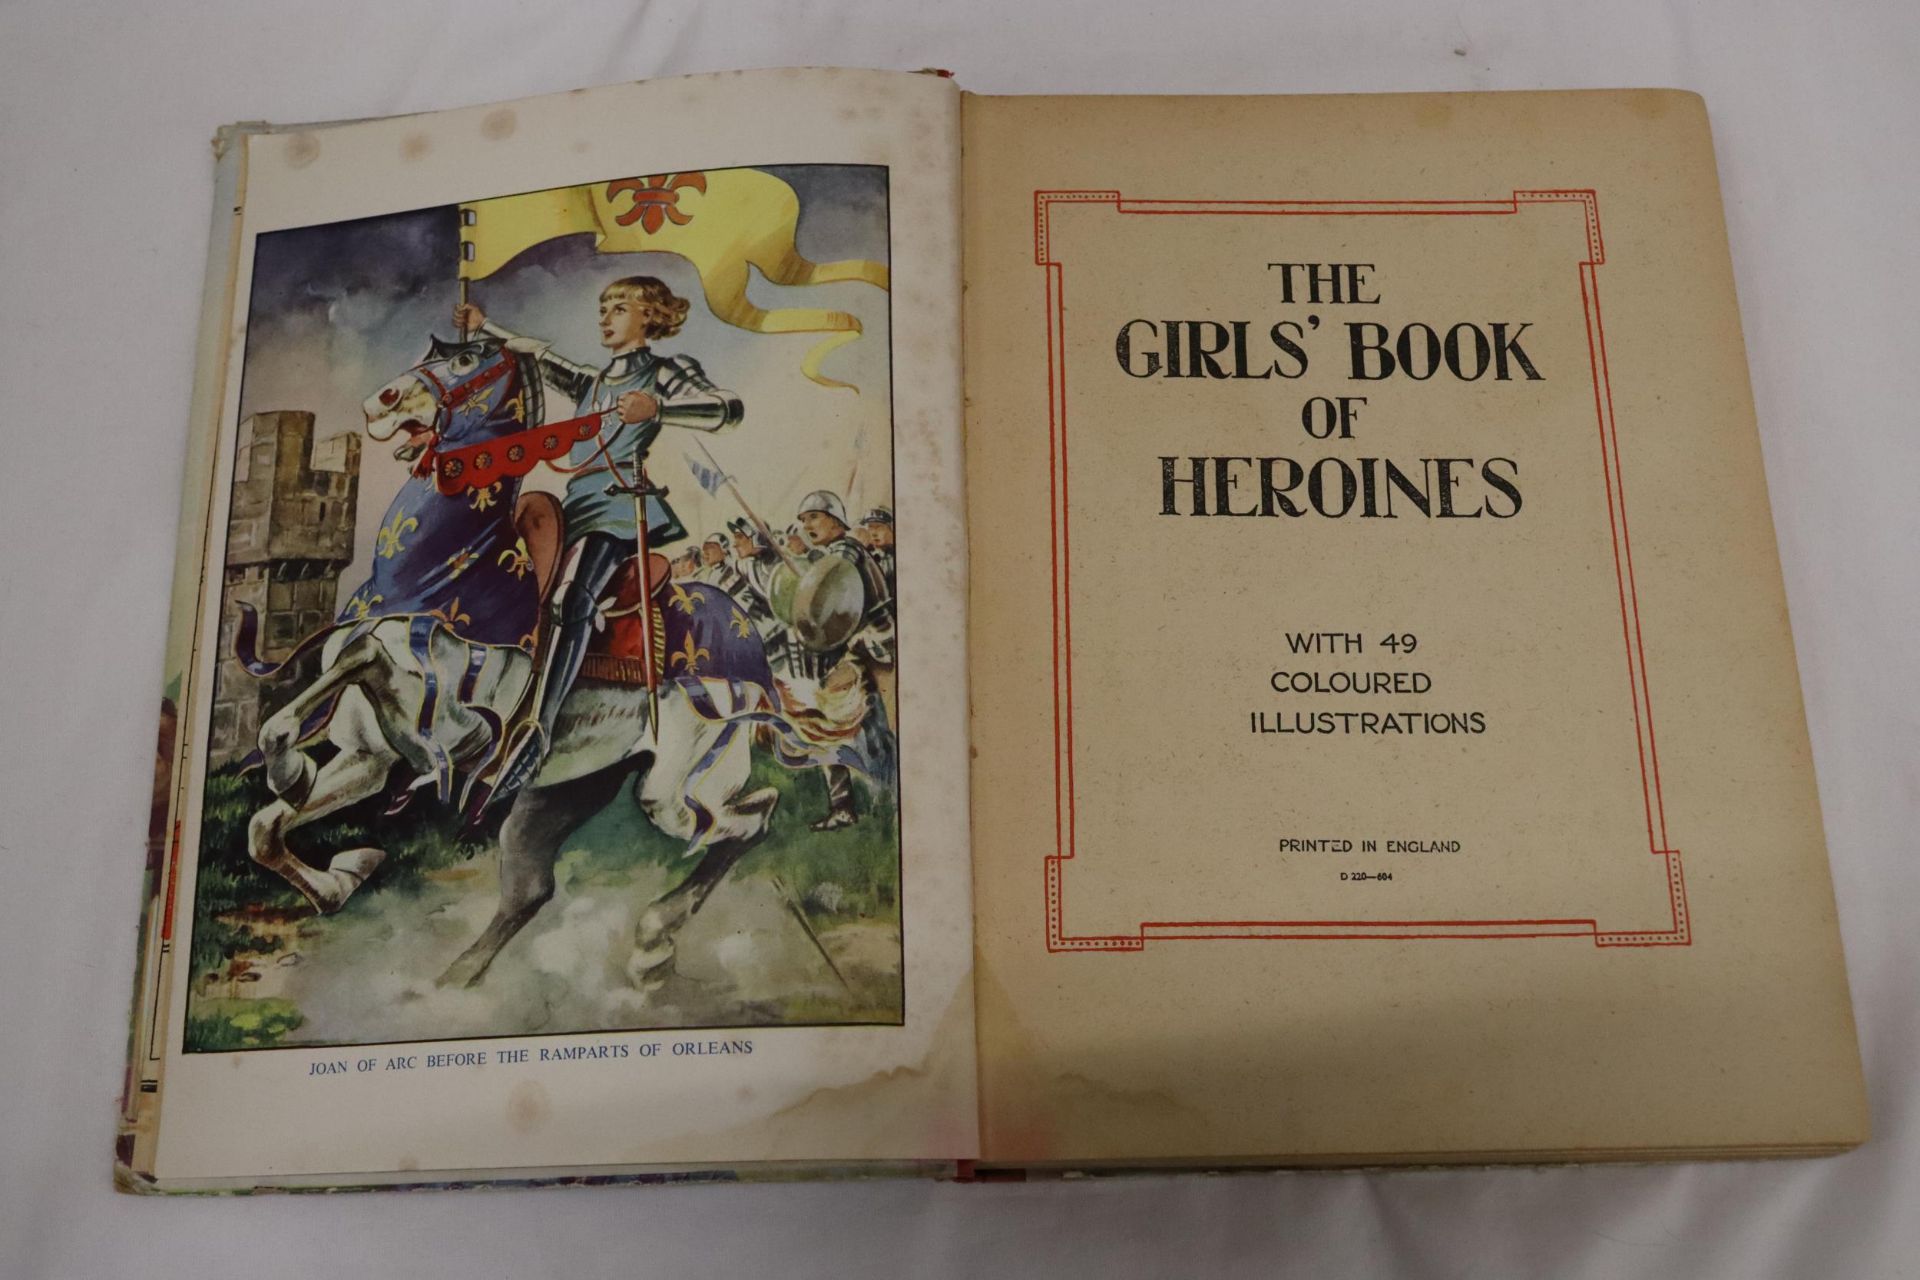 TWO VINTAGE HARDBACK CHILDREN'S BOOKS, 'THE GIRL'S BOOK OF HEROINES' AND 'LAMB'S TALES FROM - Bild 7 aus 8